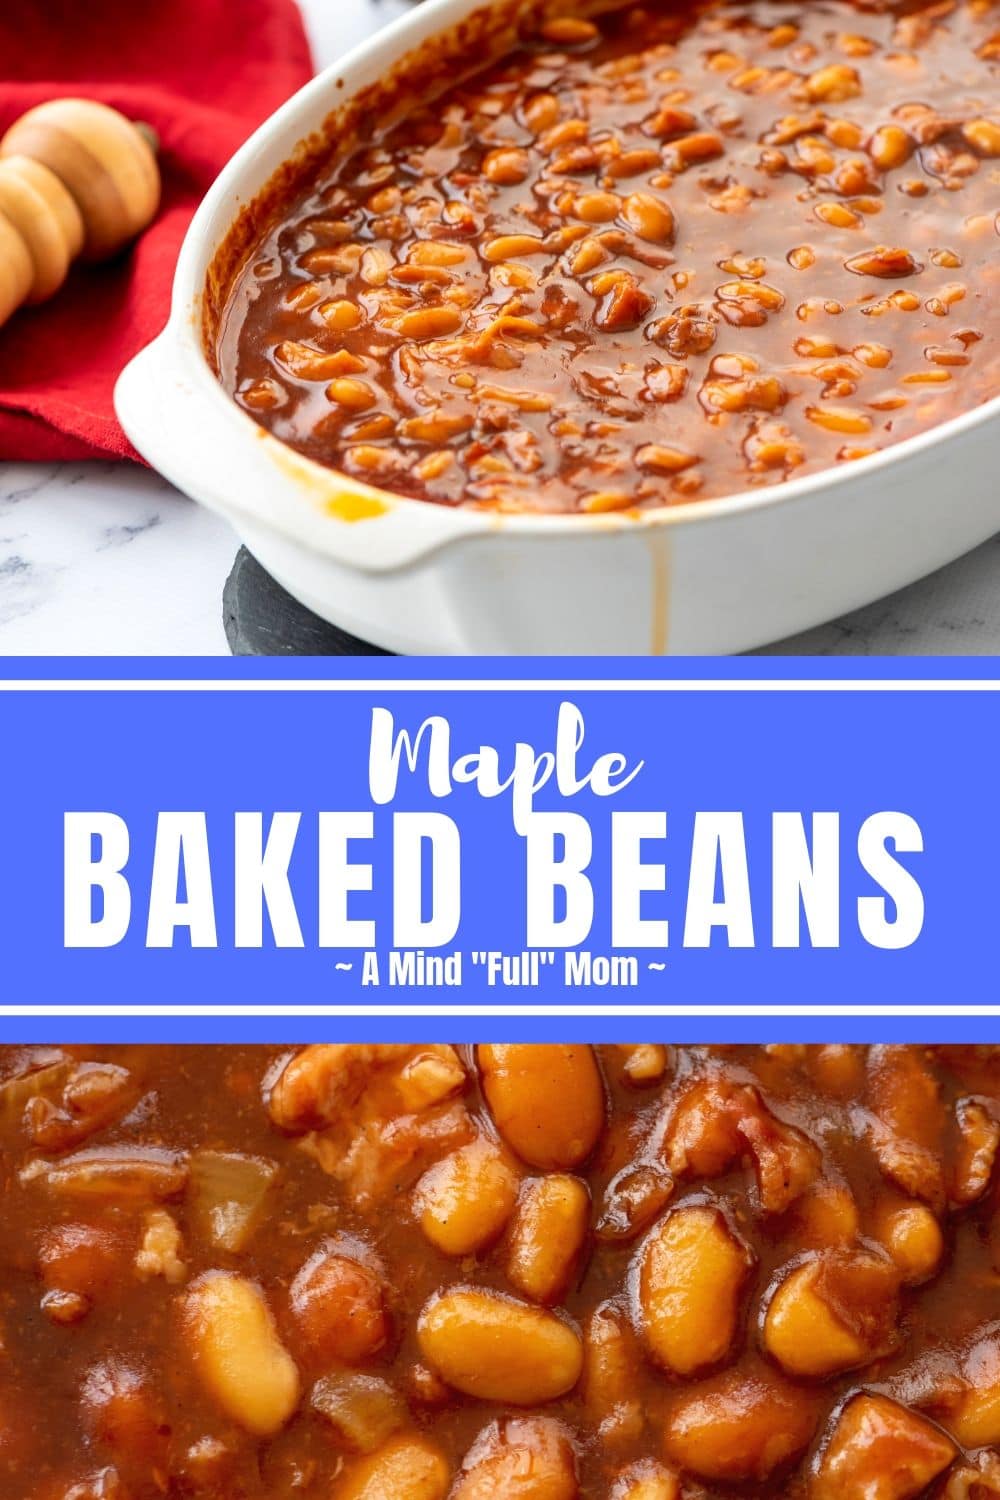 These Old Fashioned Baked Beans are made from scratch with a sweet and savory sauce. This is a family heirloom recipe for the BEST Homemade Baked Beans! #bakedbeans #sidedish